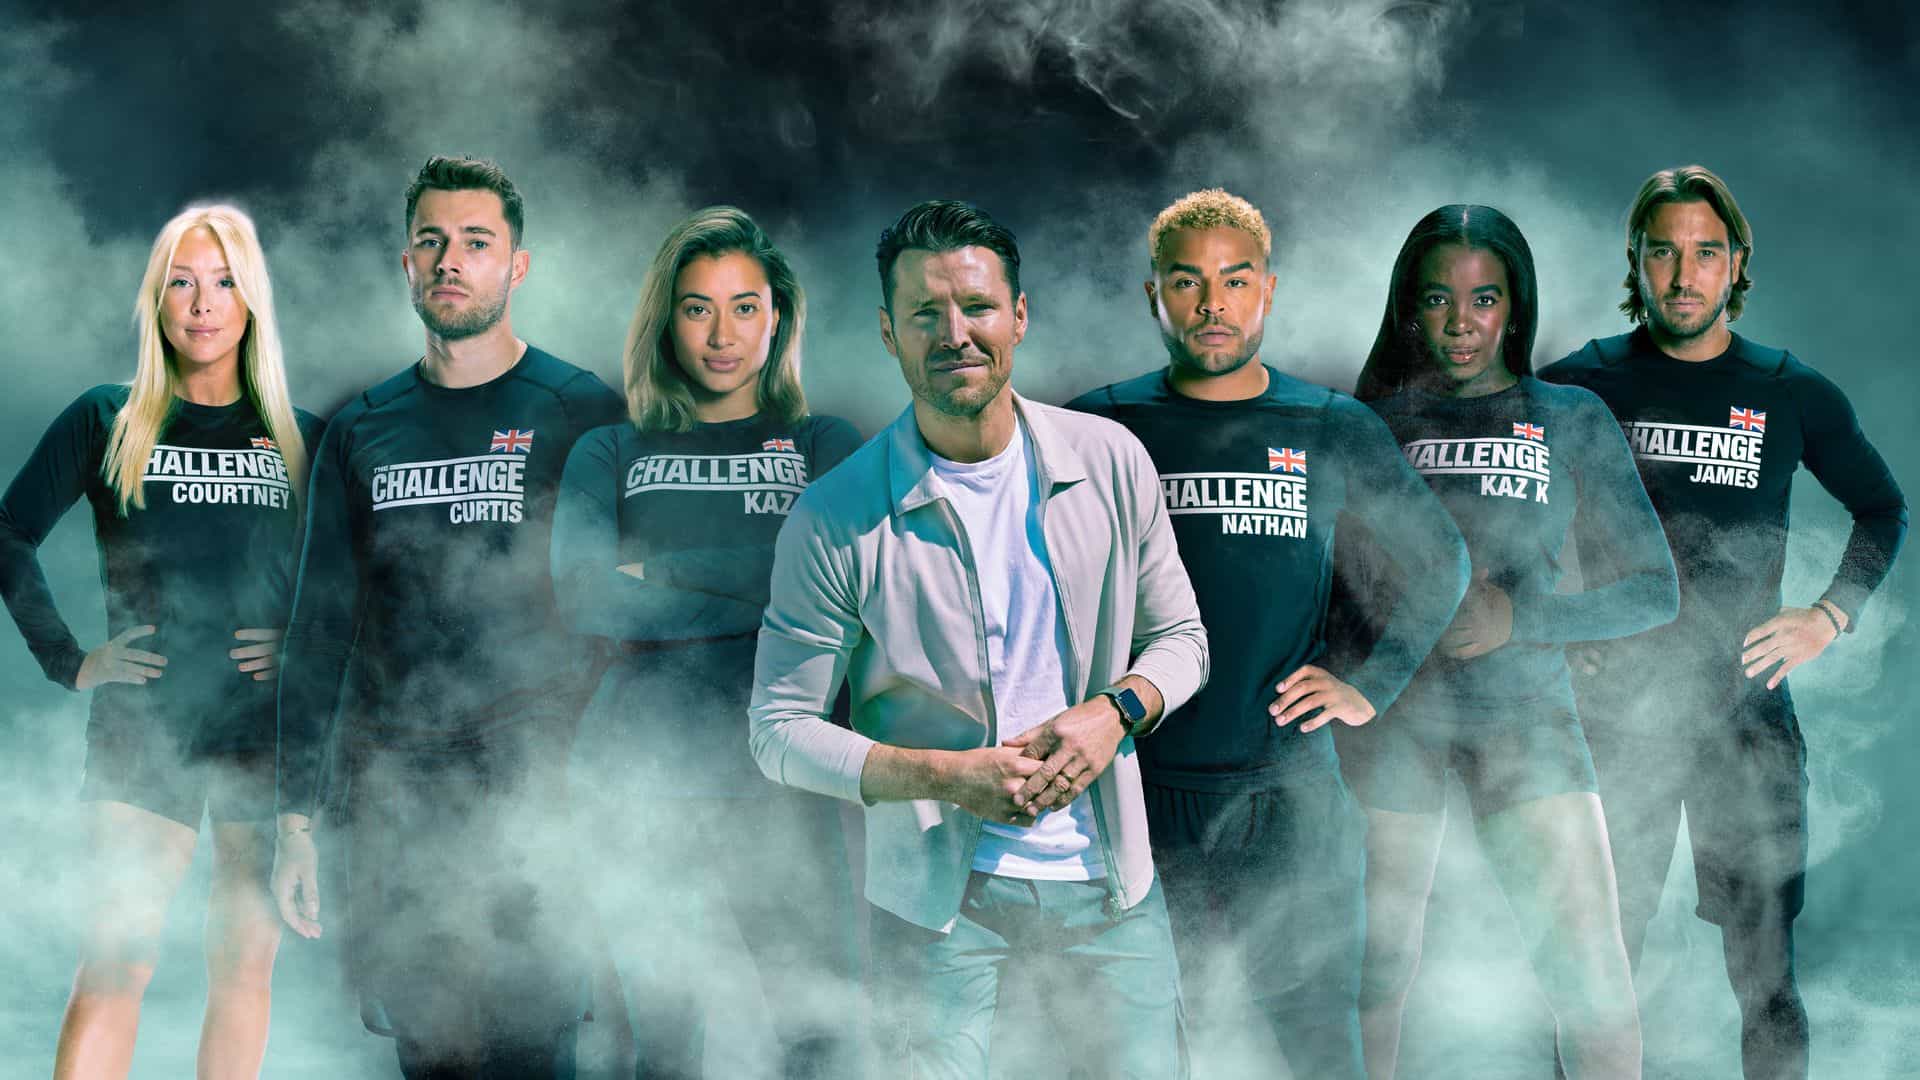 Poster of The Challenge UK